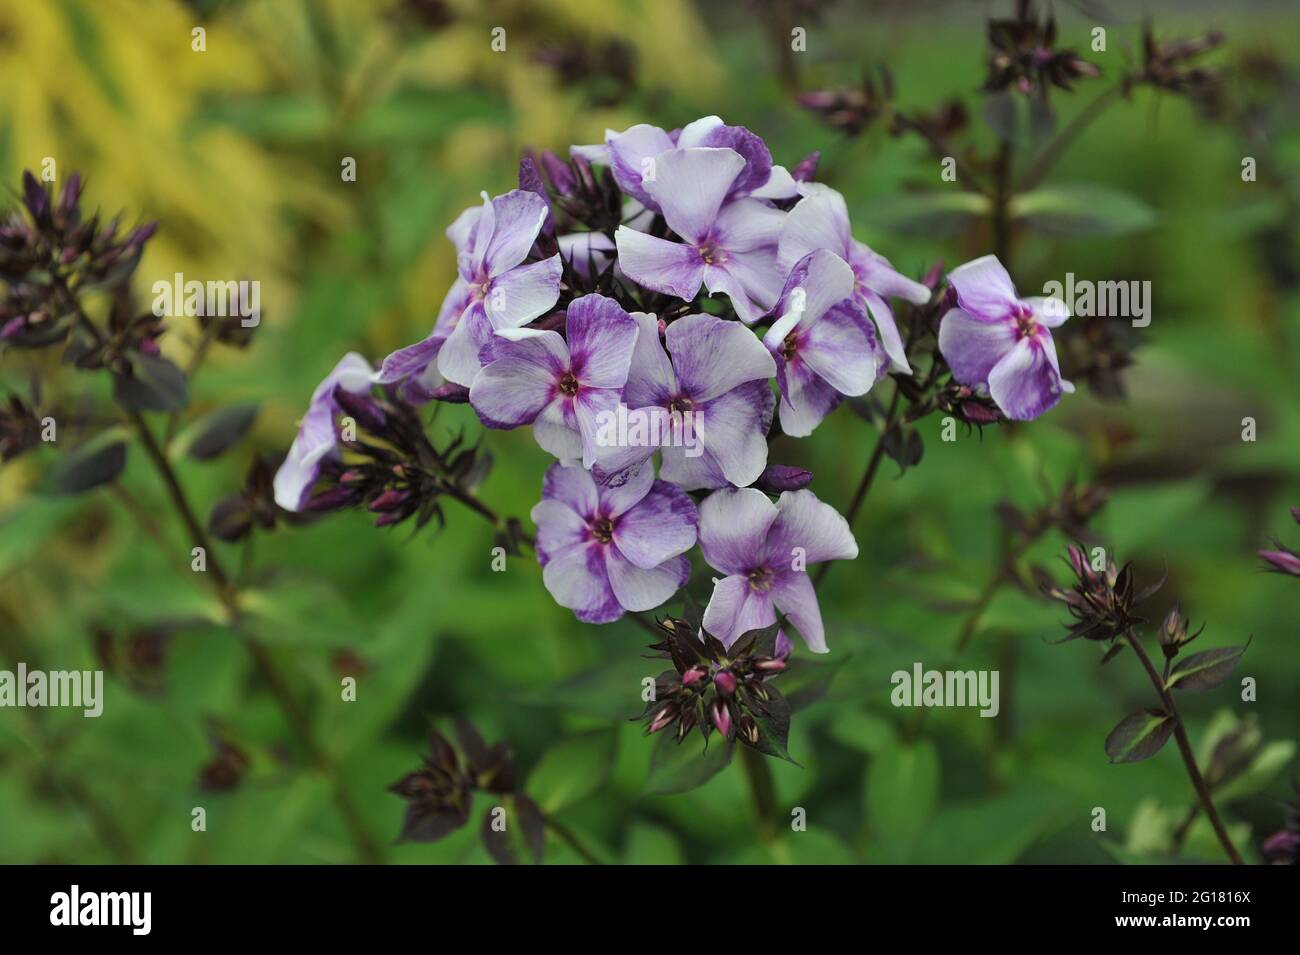 Violet-blue phlox paniculata Alexandr Voin blooms in a garden in July Stock Photo